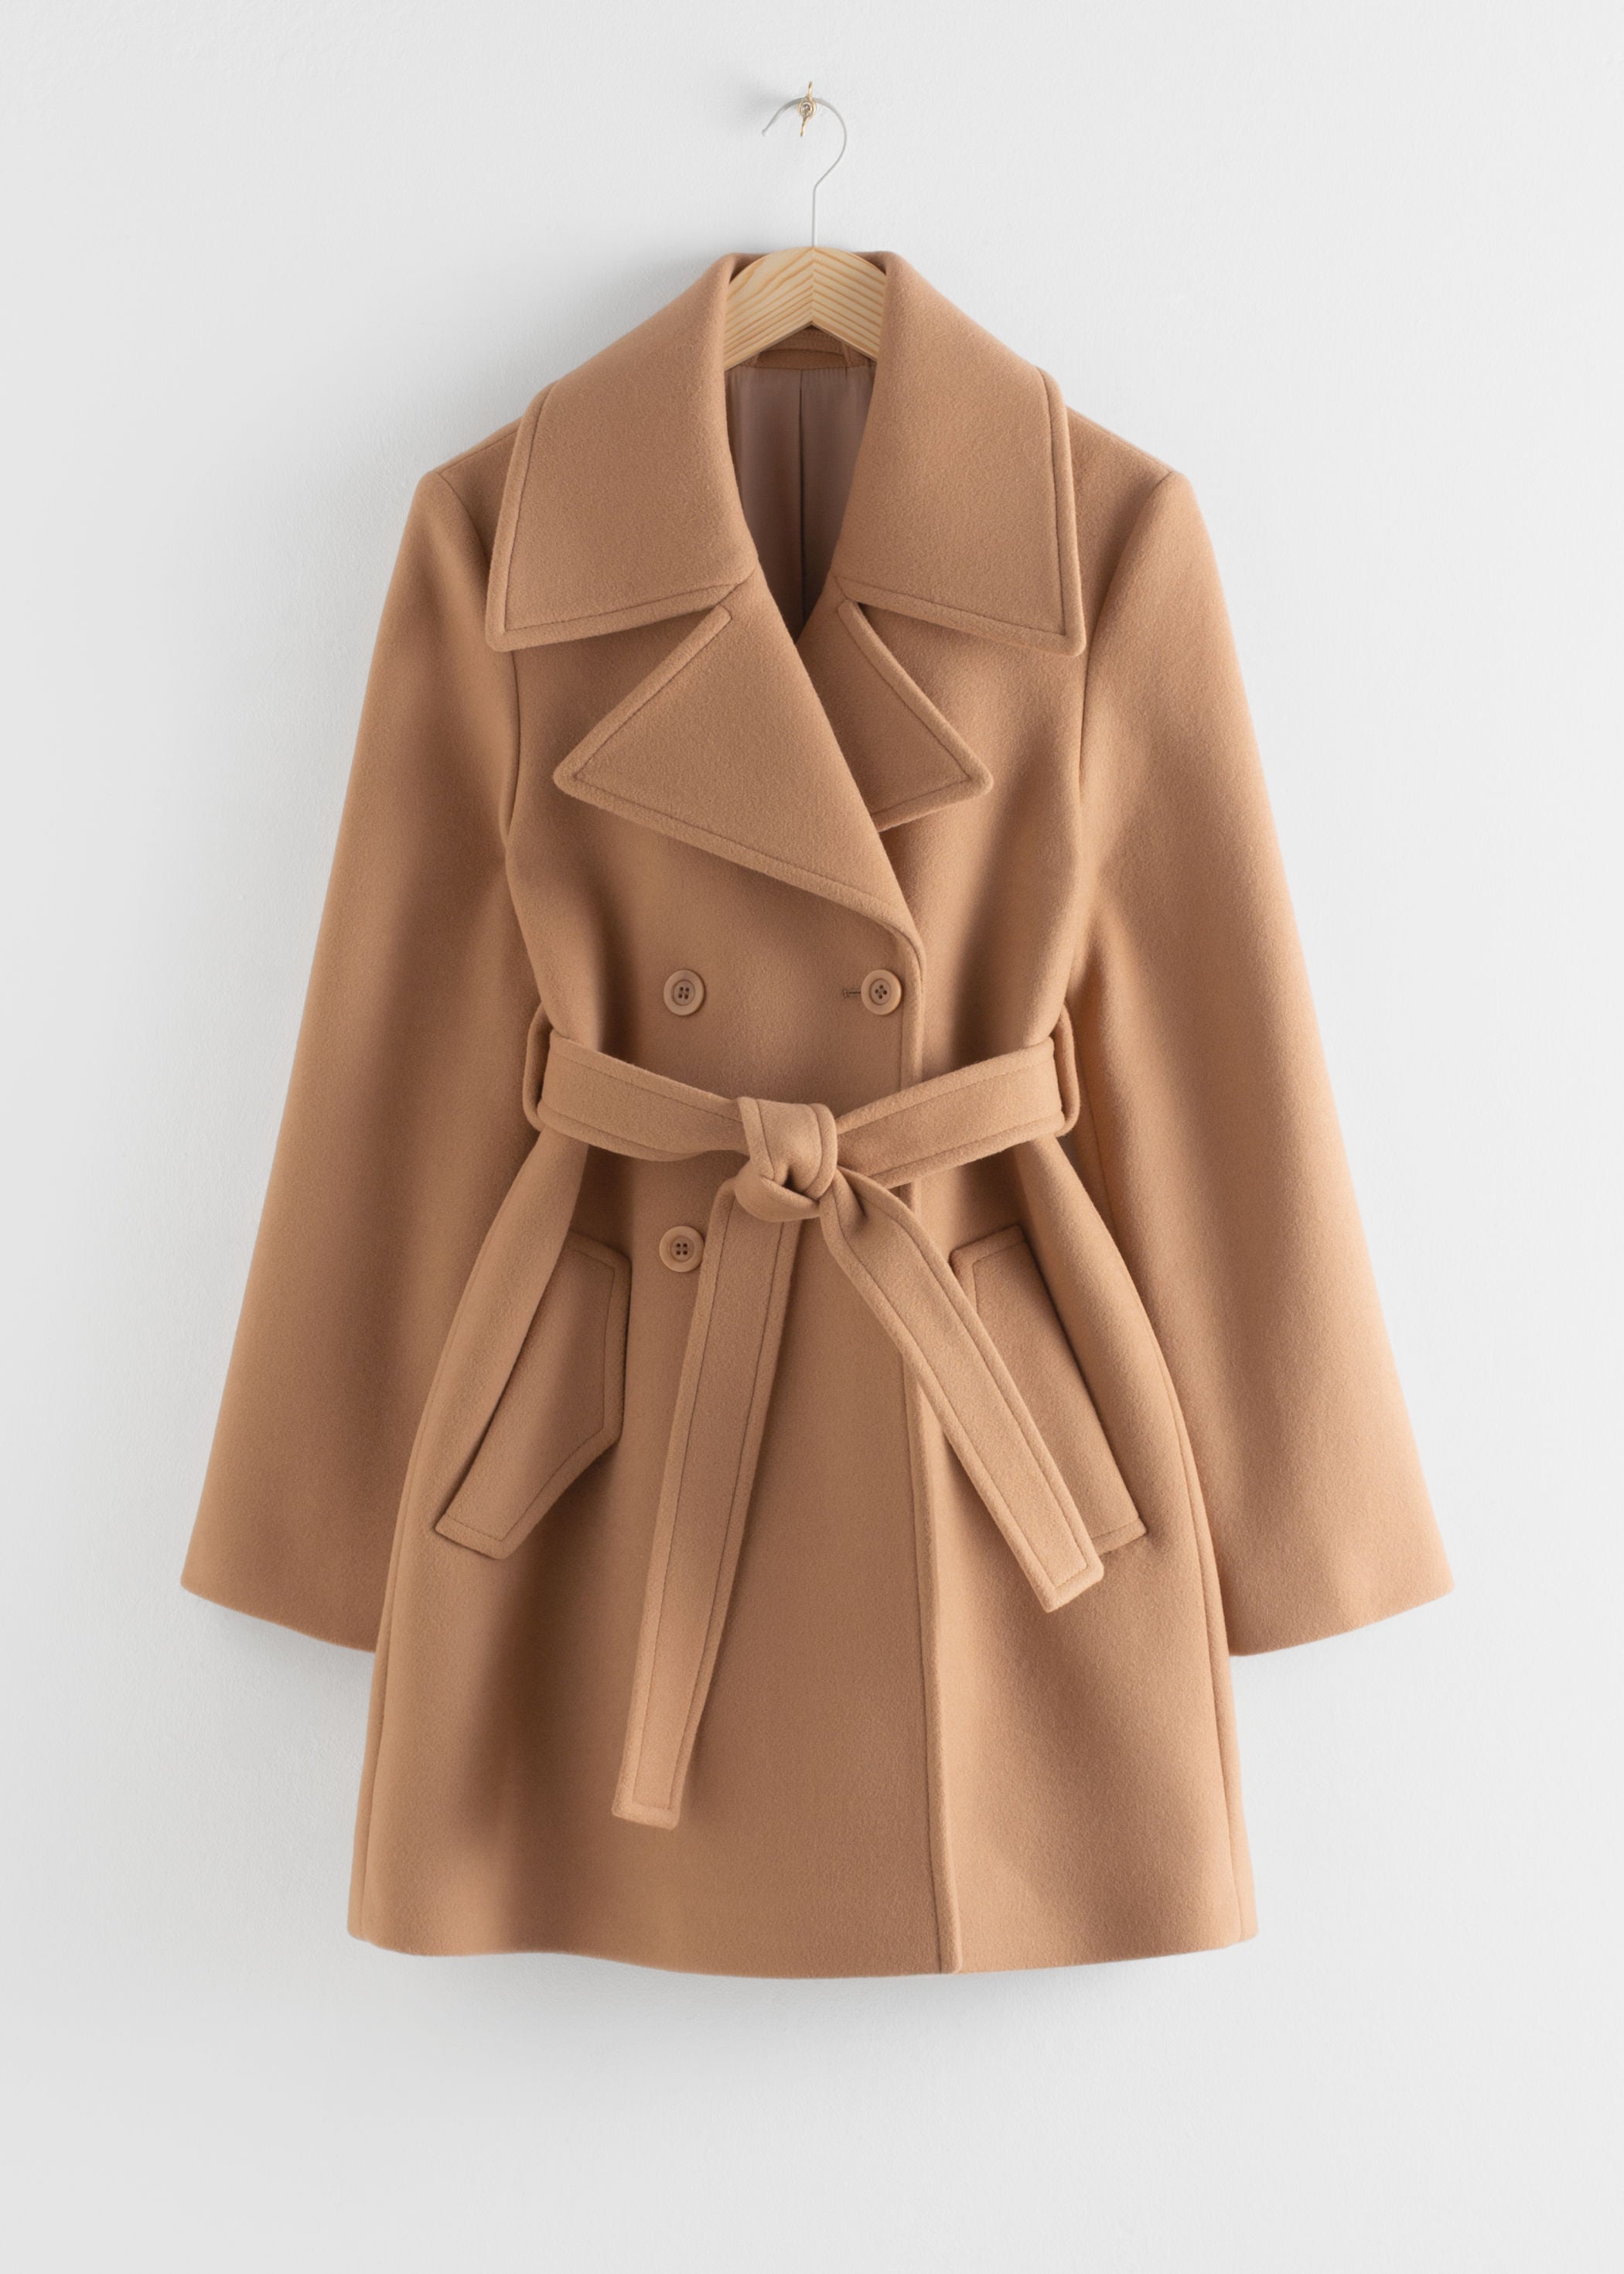 & Other Stories + Double Breasted Belted Coat